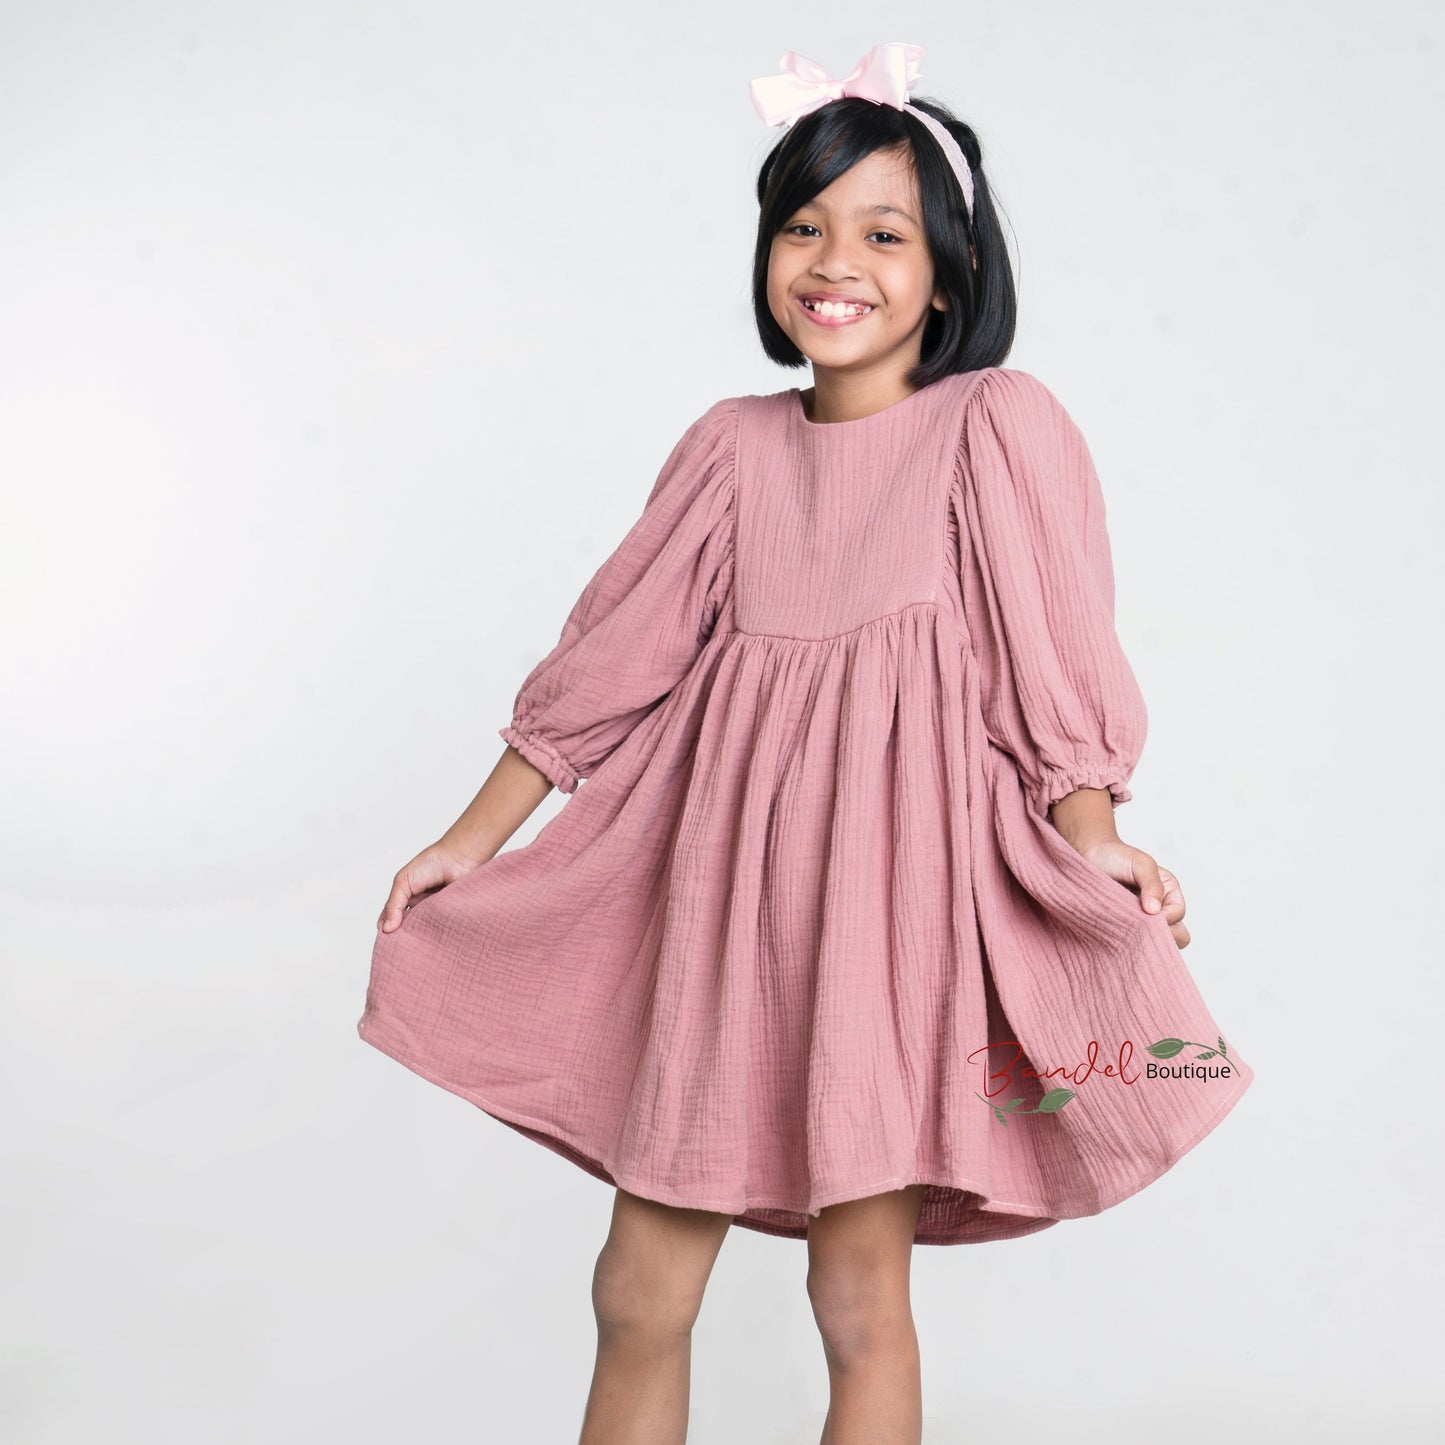 handmade muslin girl dress with 3/4 length ruffled sleeves. Crafted with care and attention to detail, this knee- length Double Gauze Girl dress exudes charm and sophistication. The ruffled hem with elastic casing adds a playful touch, while the comfortable muslin fabric ensures all-day comfort for your child.